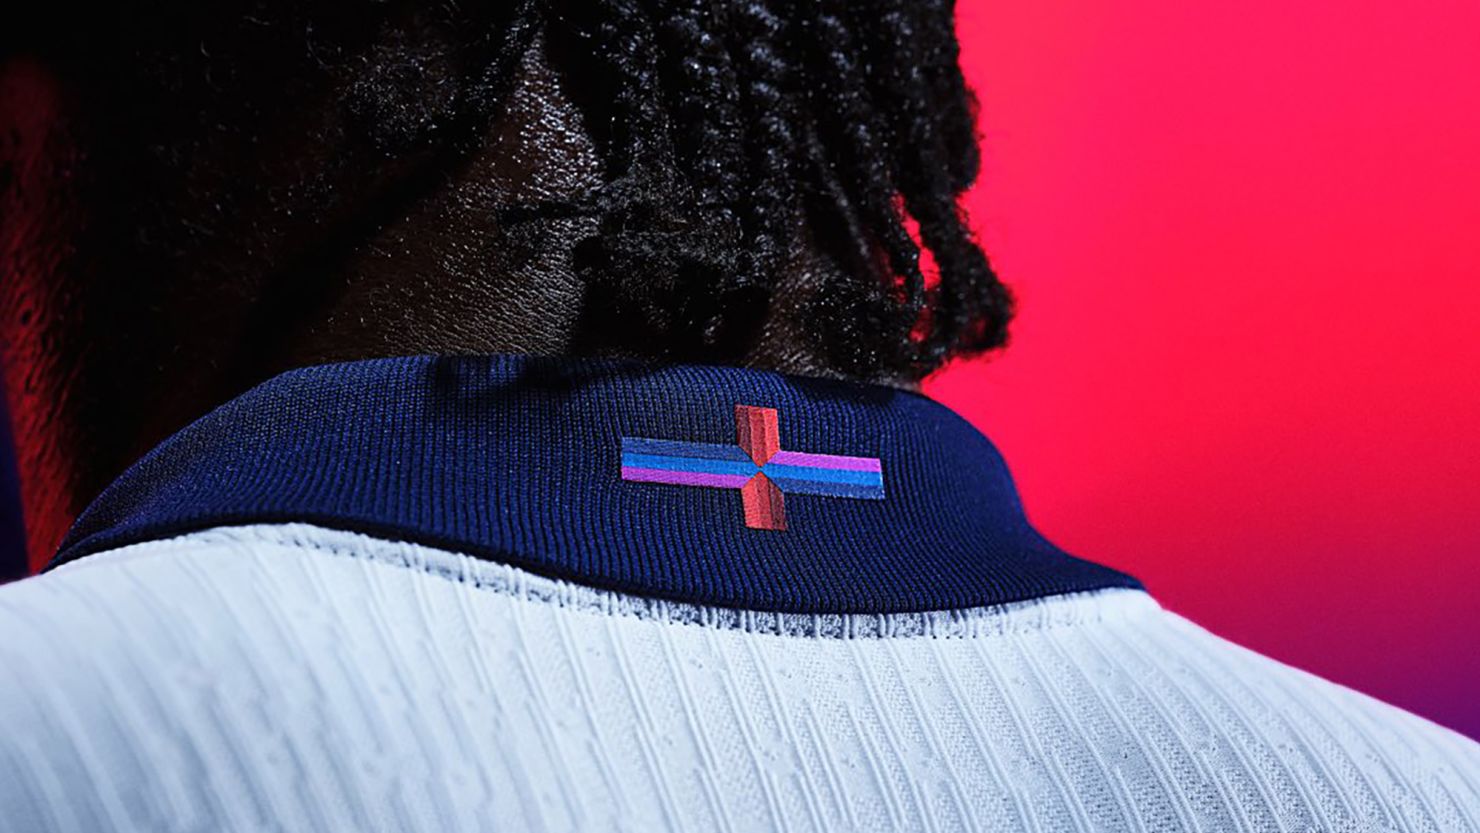 An update to the cross of St. George appears on the collar of Nike's new England kit.